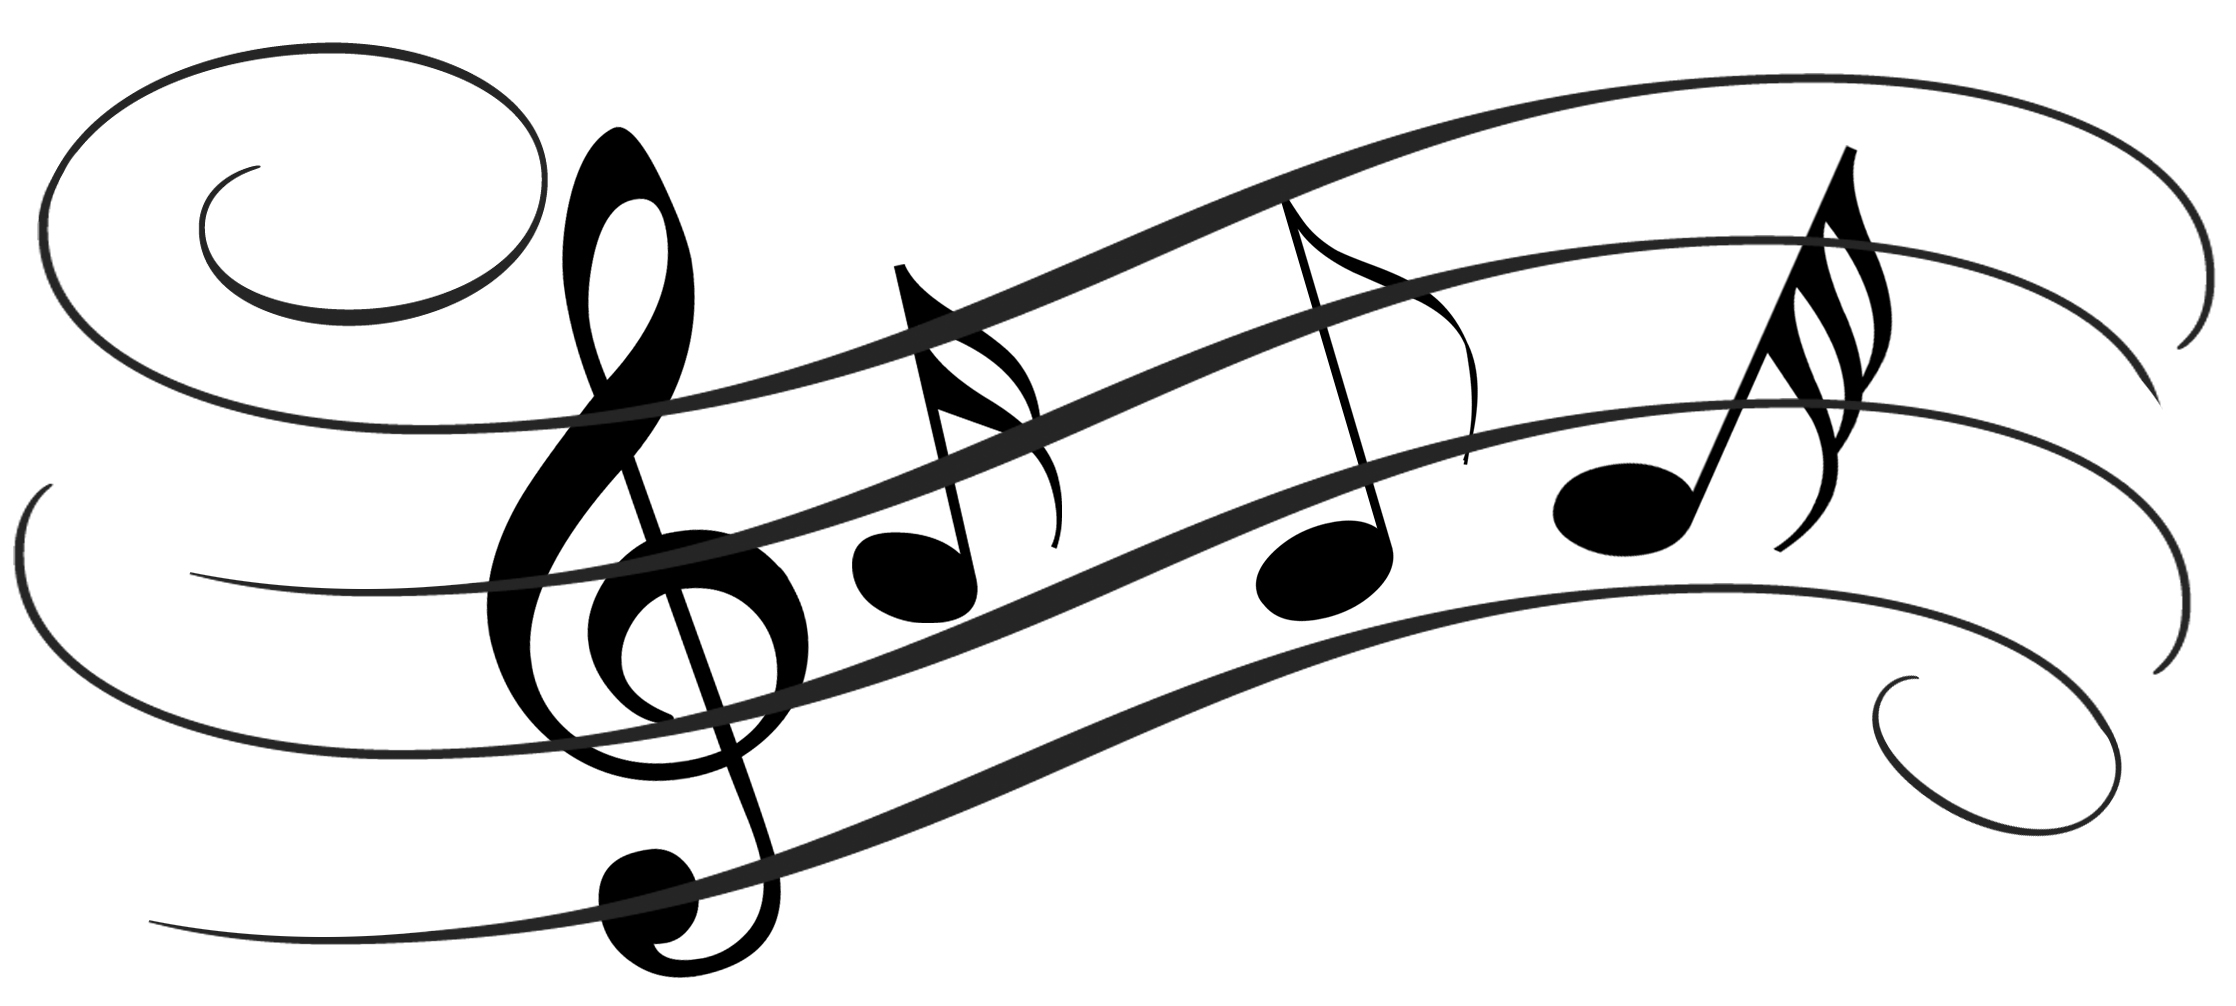 Music Notes On Staff Clipart | Clipart Panda - Free Clipart Images